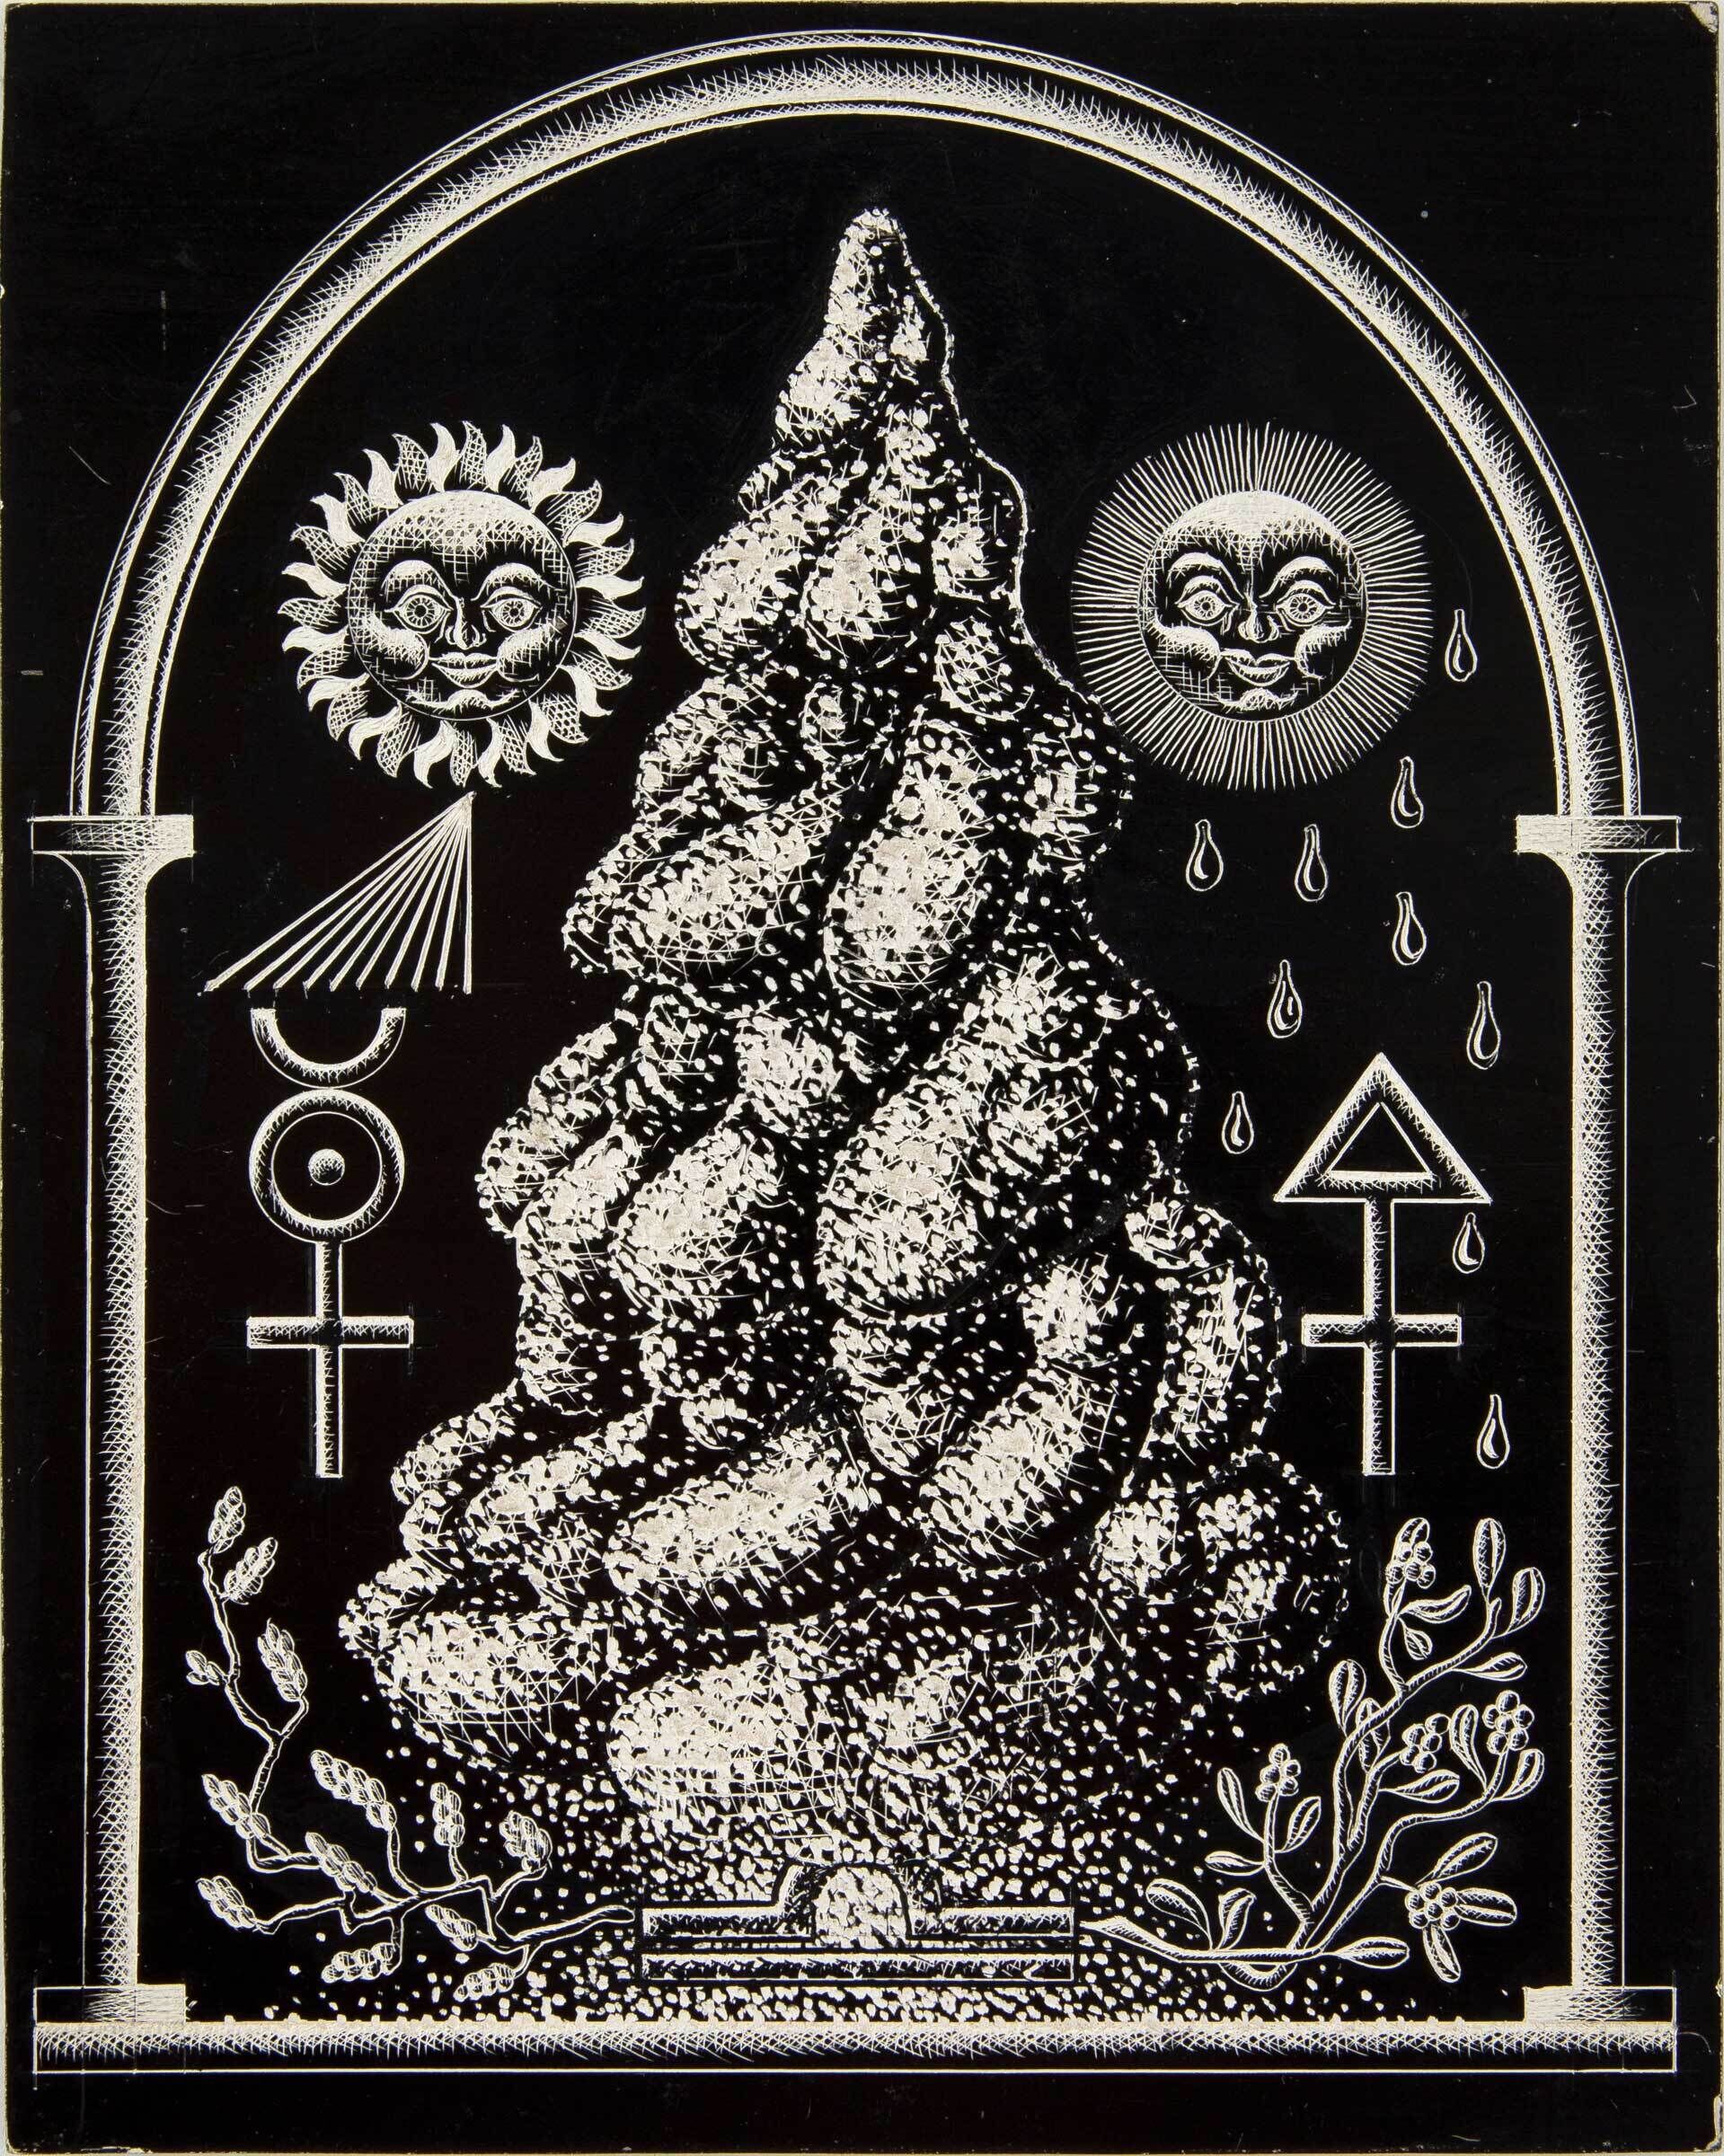 A black and white etched print of an arch. Within the arch is a warped, textured cone with branches growing out of the base. Towards the top of the cone, on the left side, is a sun with a face. Parallelled on the right is a full moon.